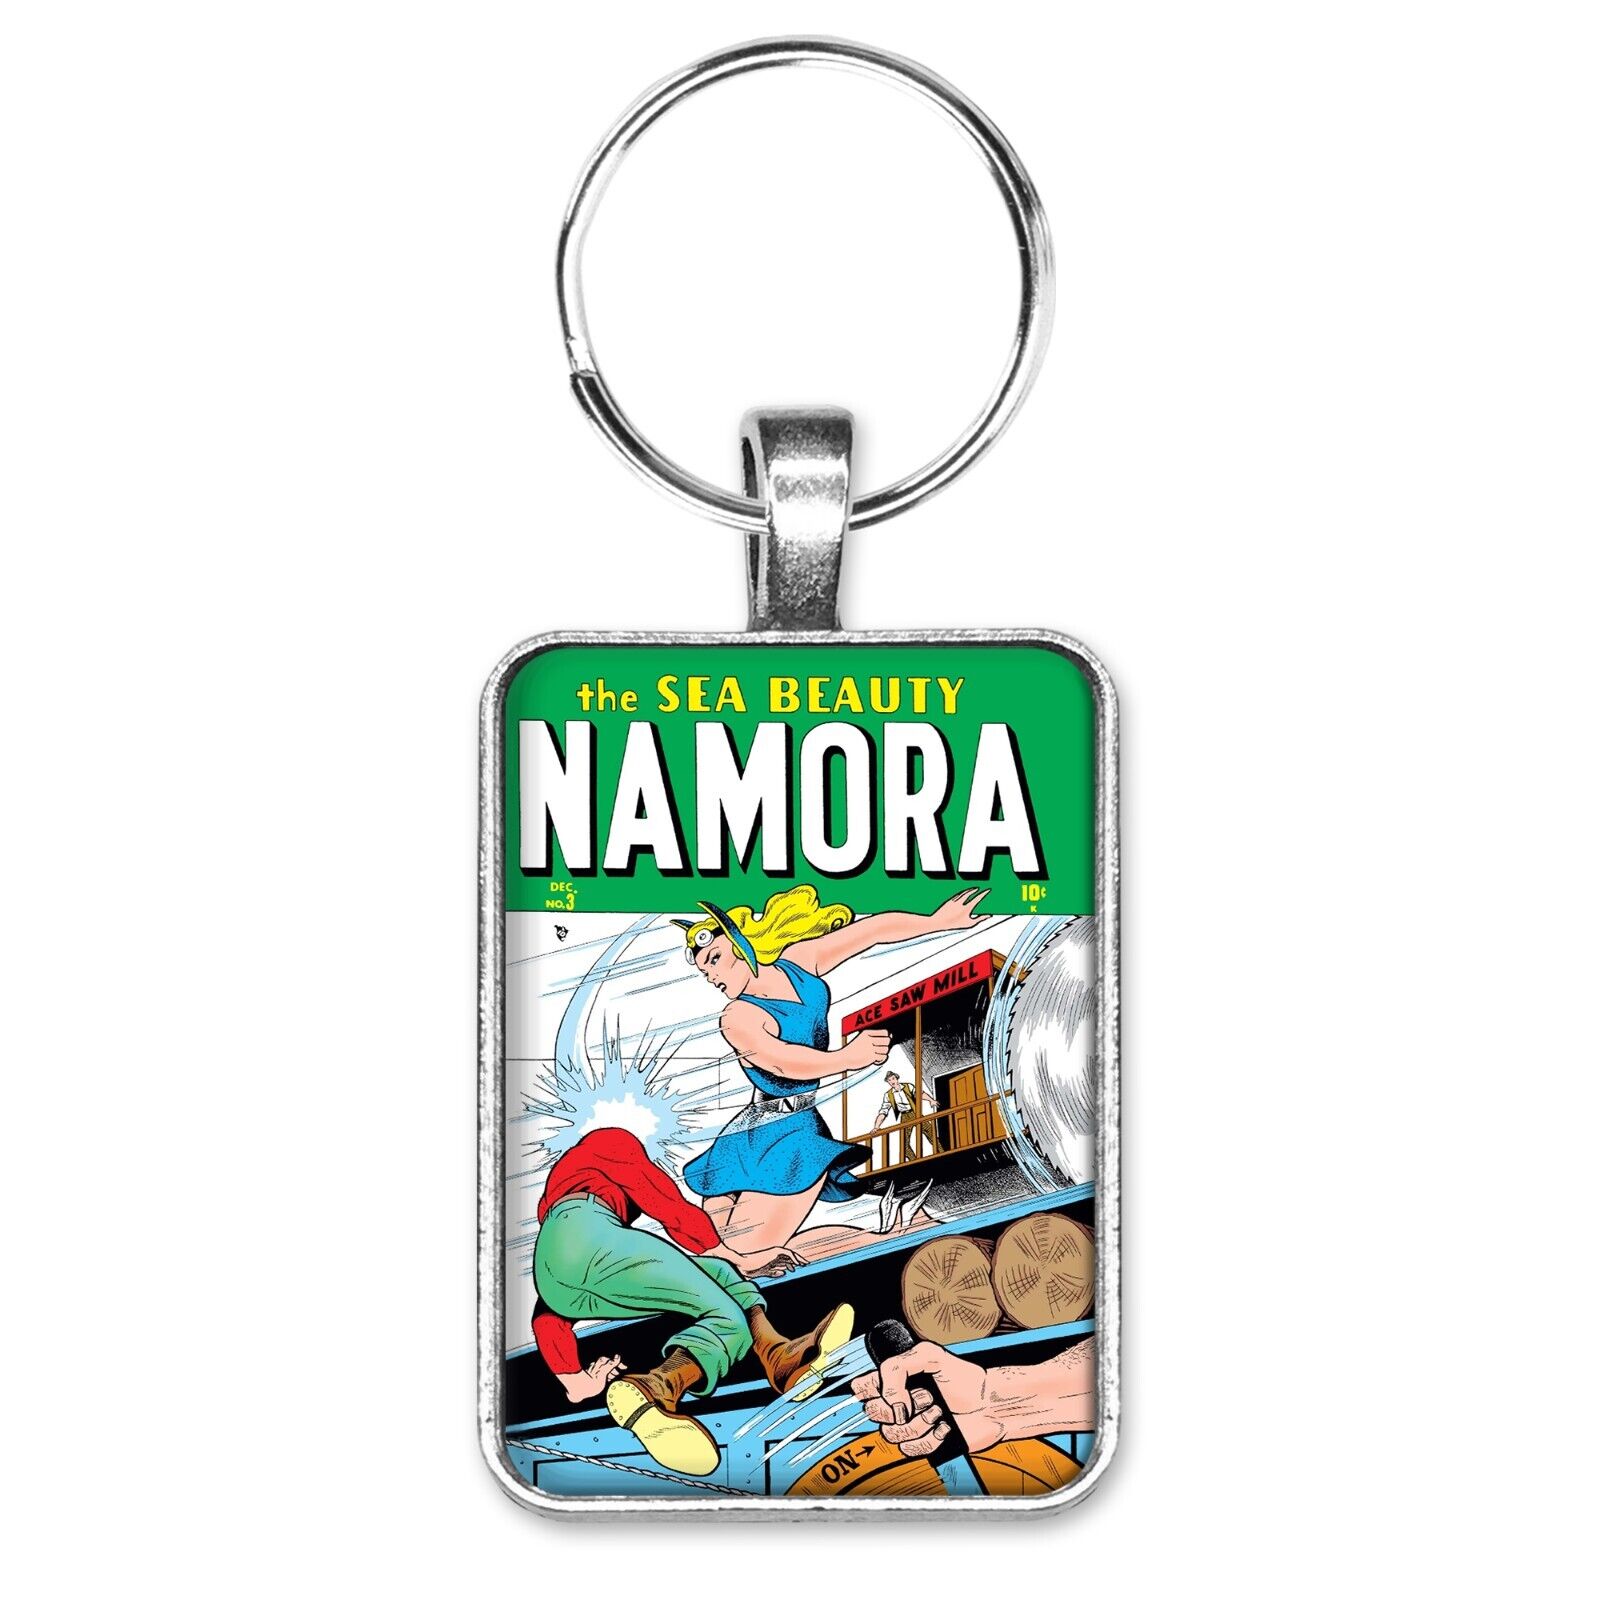 Namora the Sea Beauty #3 Cover Key Ring or Necklace Classic Comic Book Jewelry